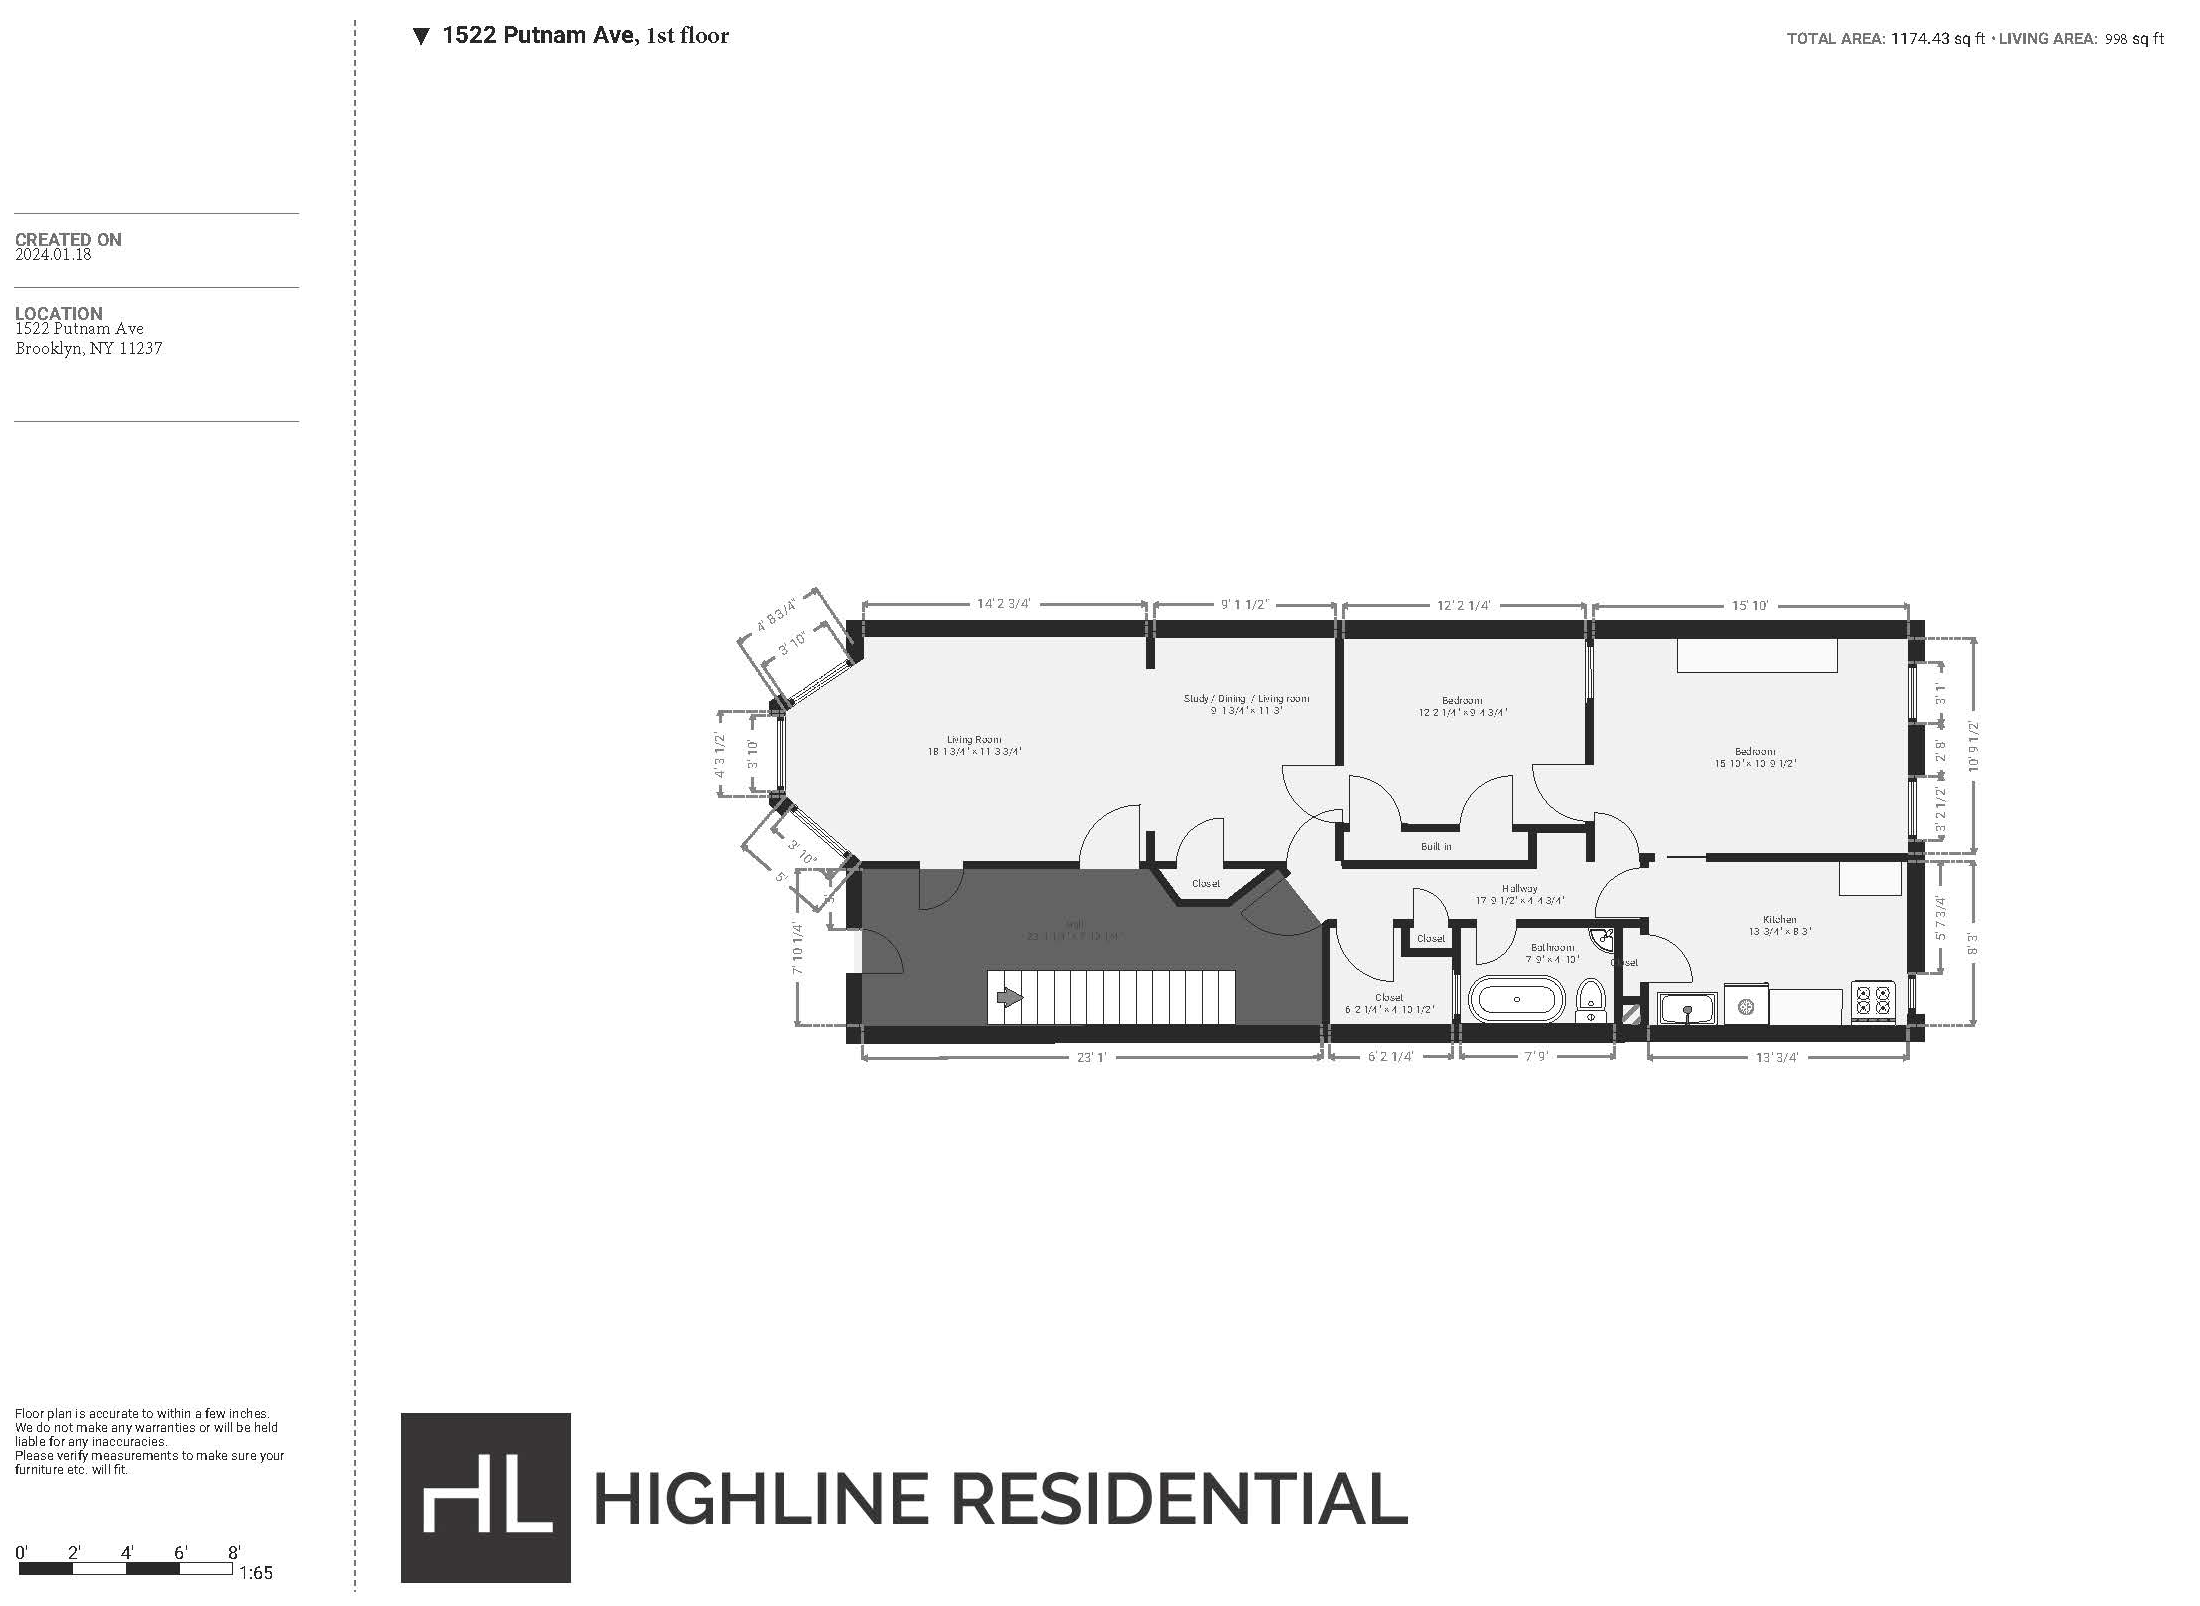 floor plan showing living room at front and kitchen at rear of the unit